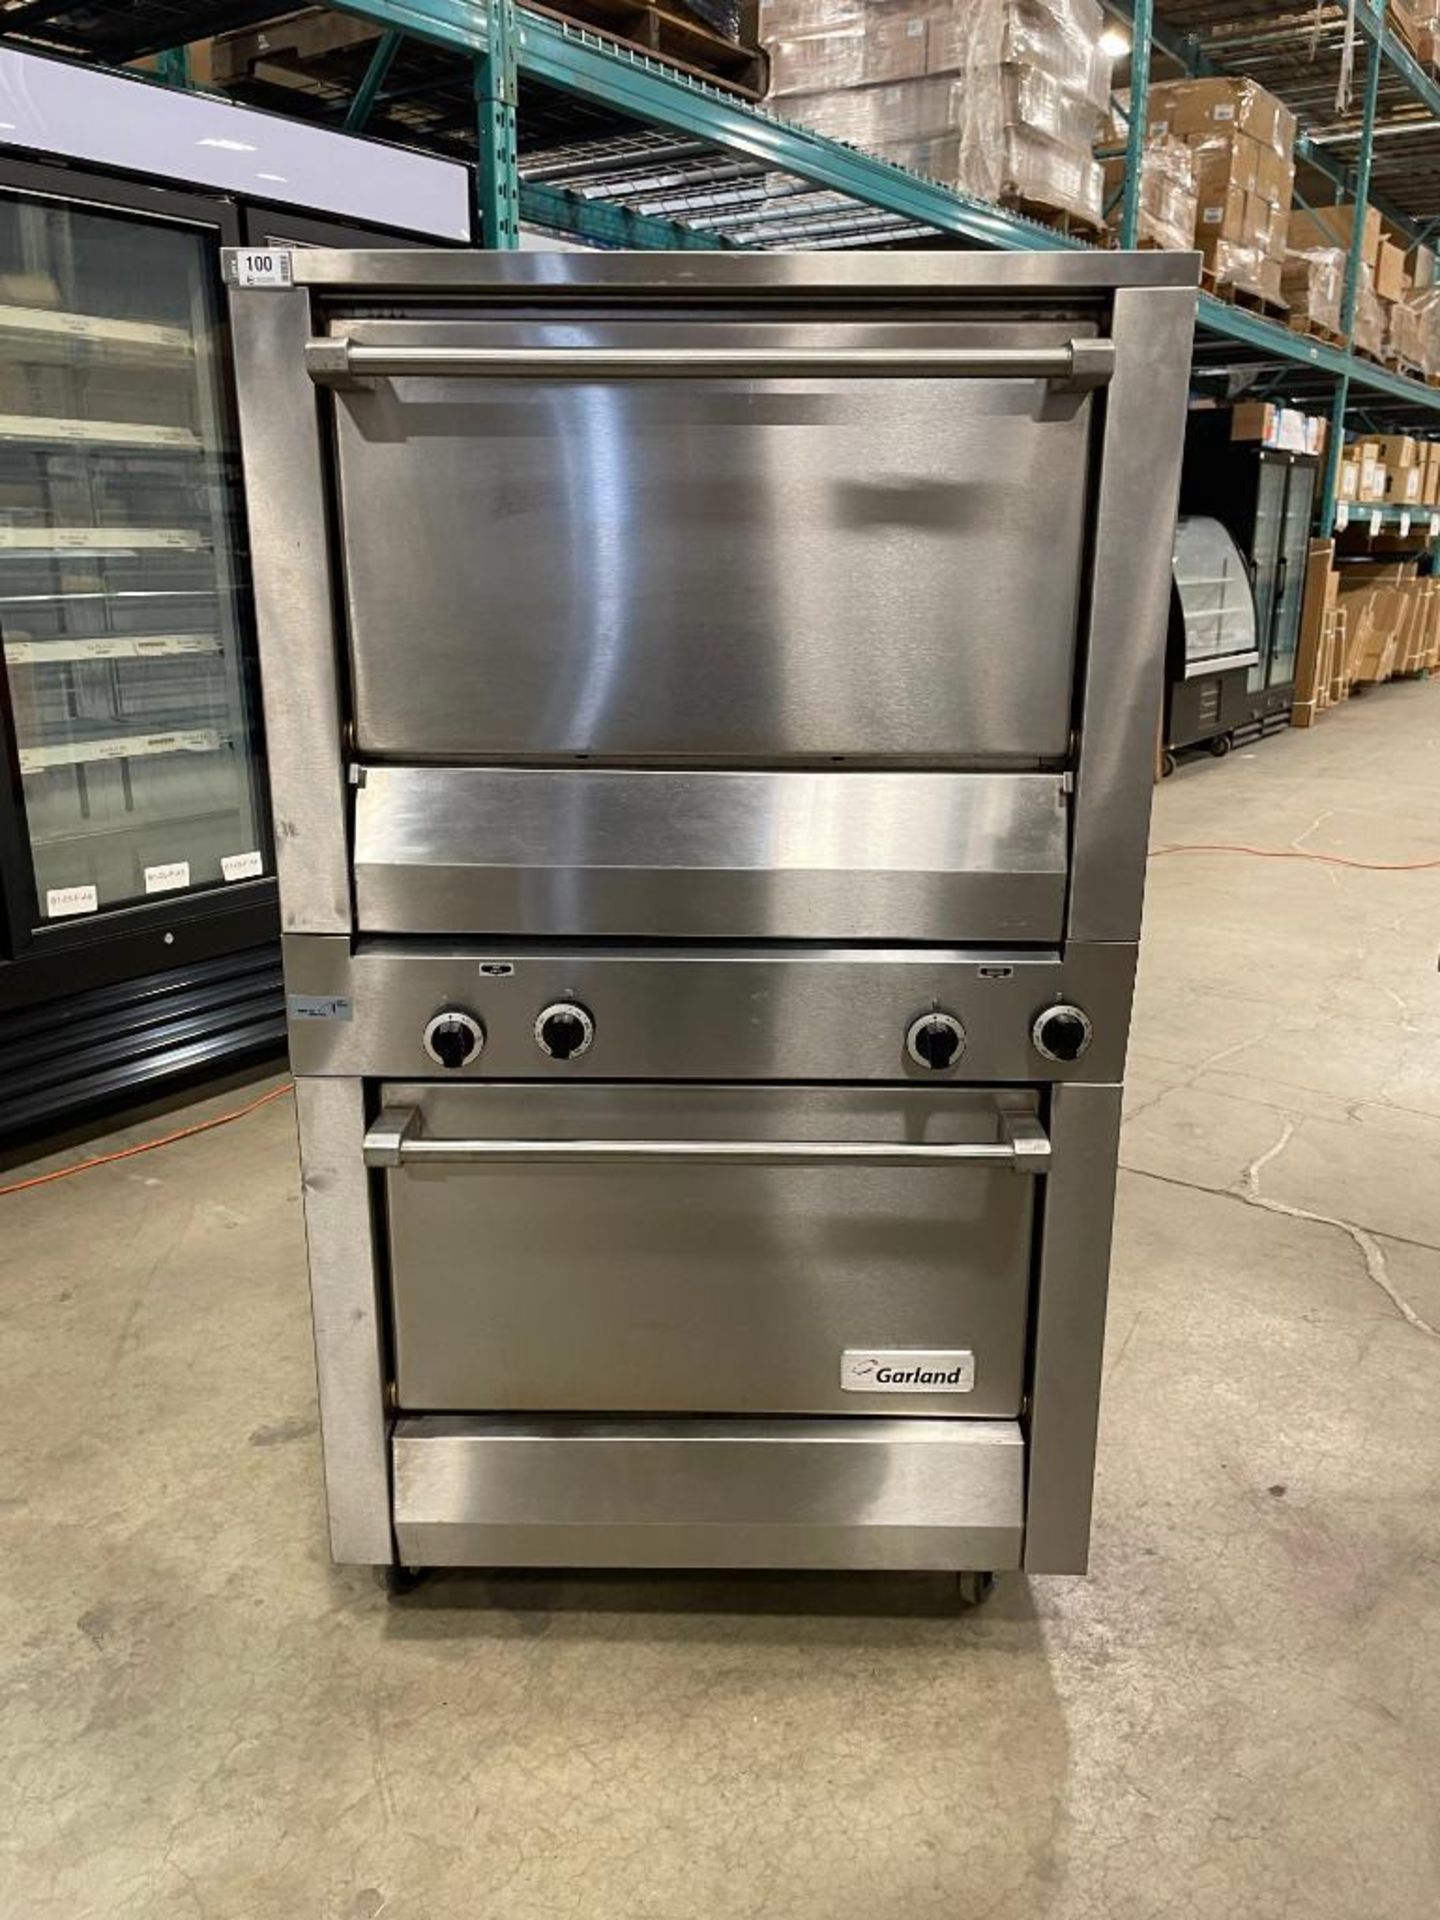 GARLAND M2R MASTER SERIES HEAVY DUTY NATURAL GAS DOUBLE OVEN - Image 14 of 14